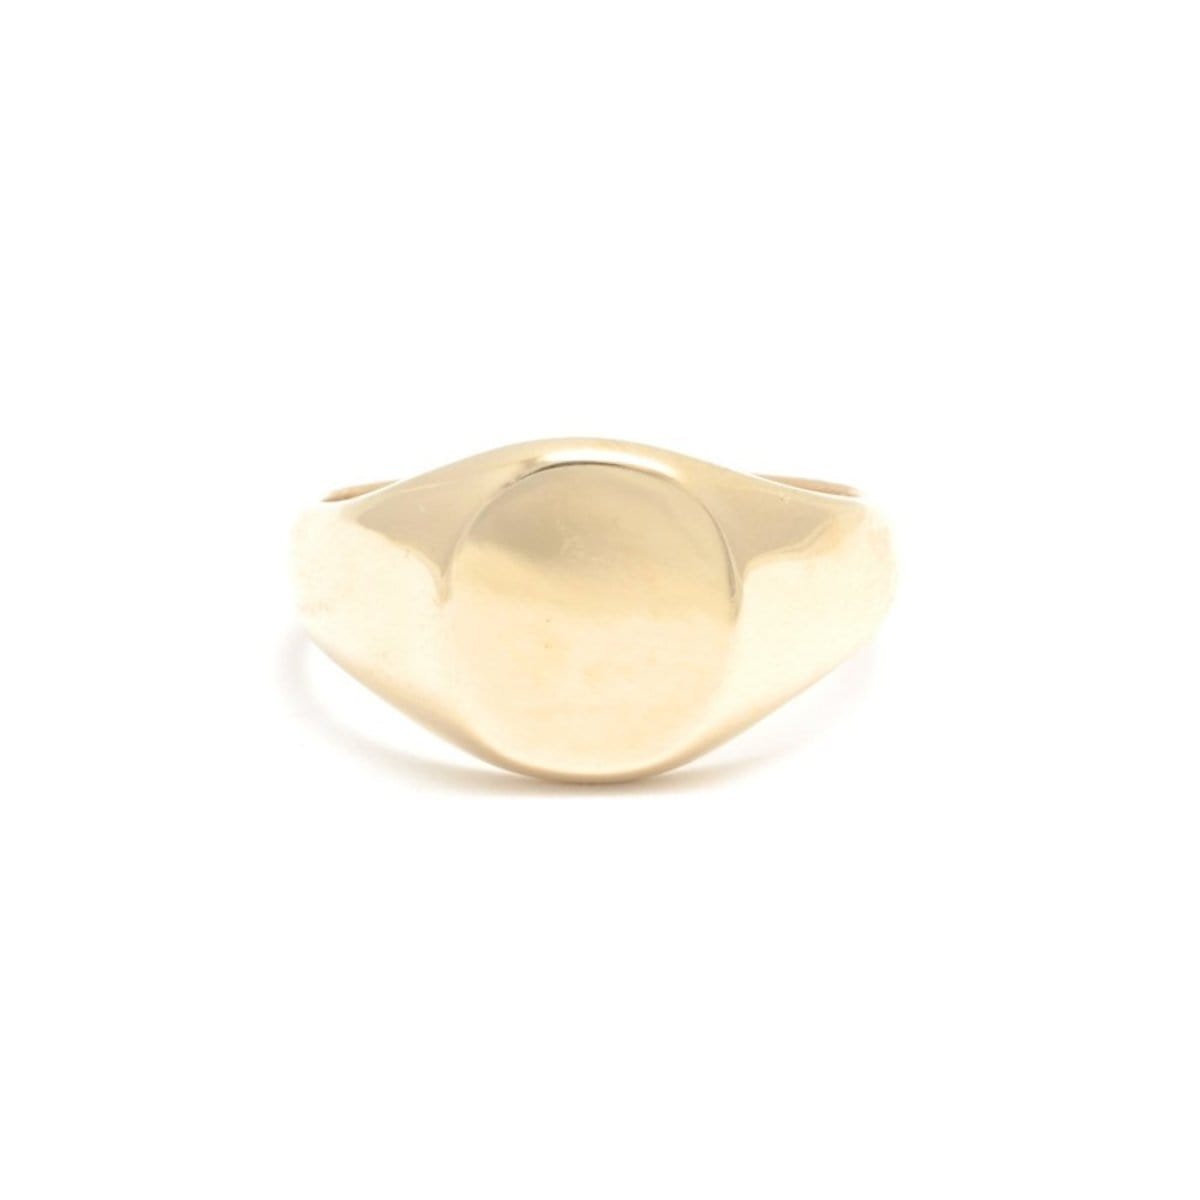  Yellow Gold Oval Signet Ring Caitlin nicole Curated Los Angeles